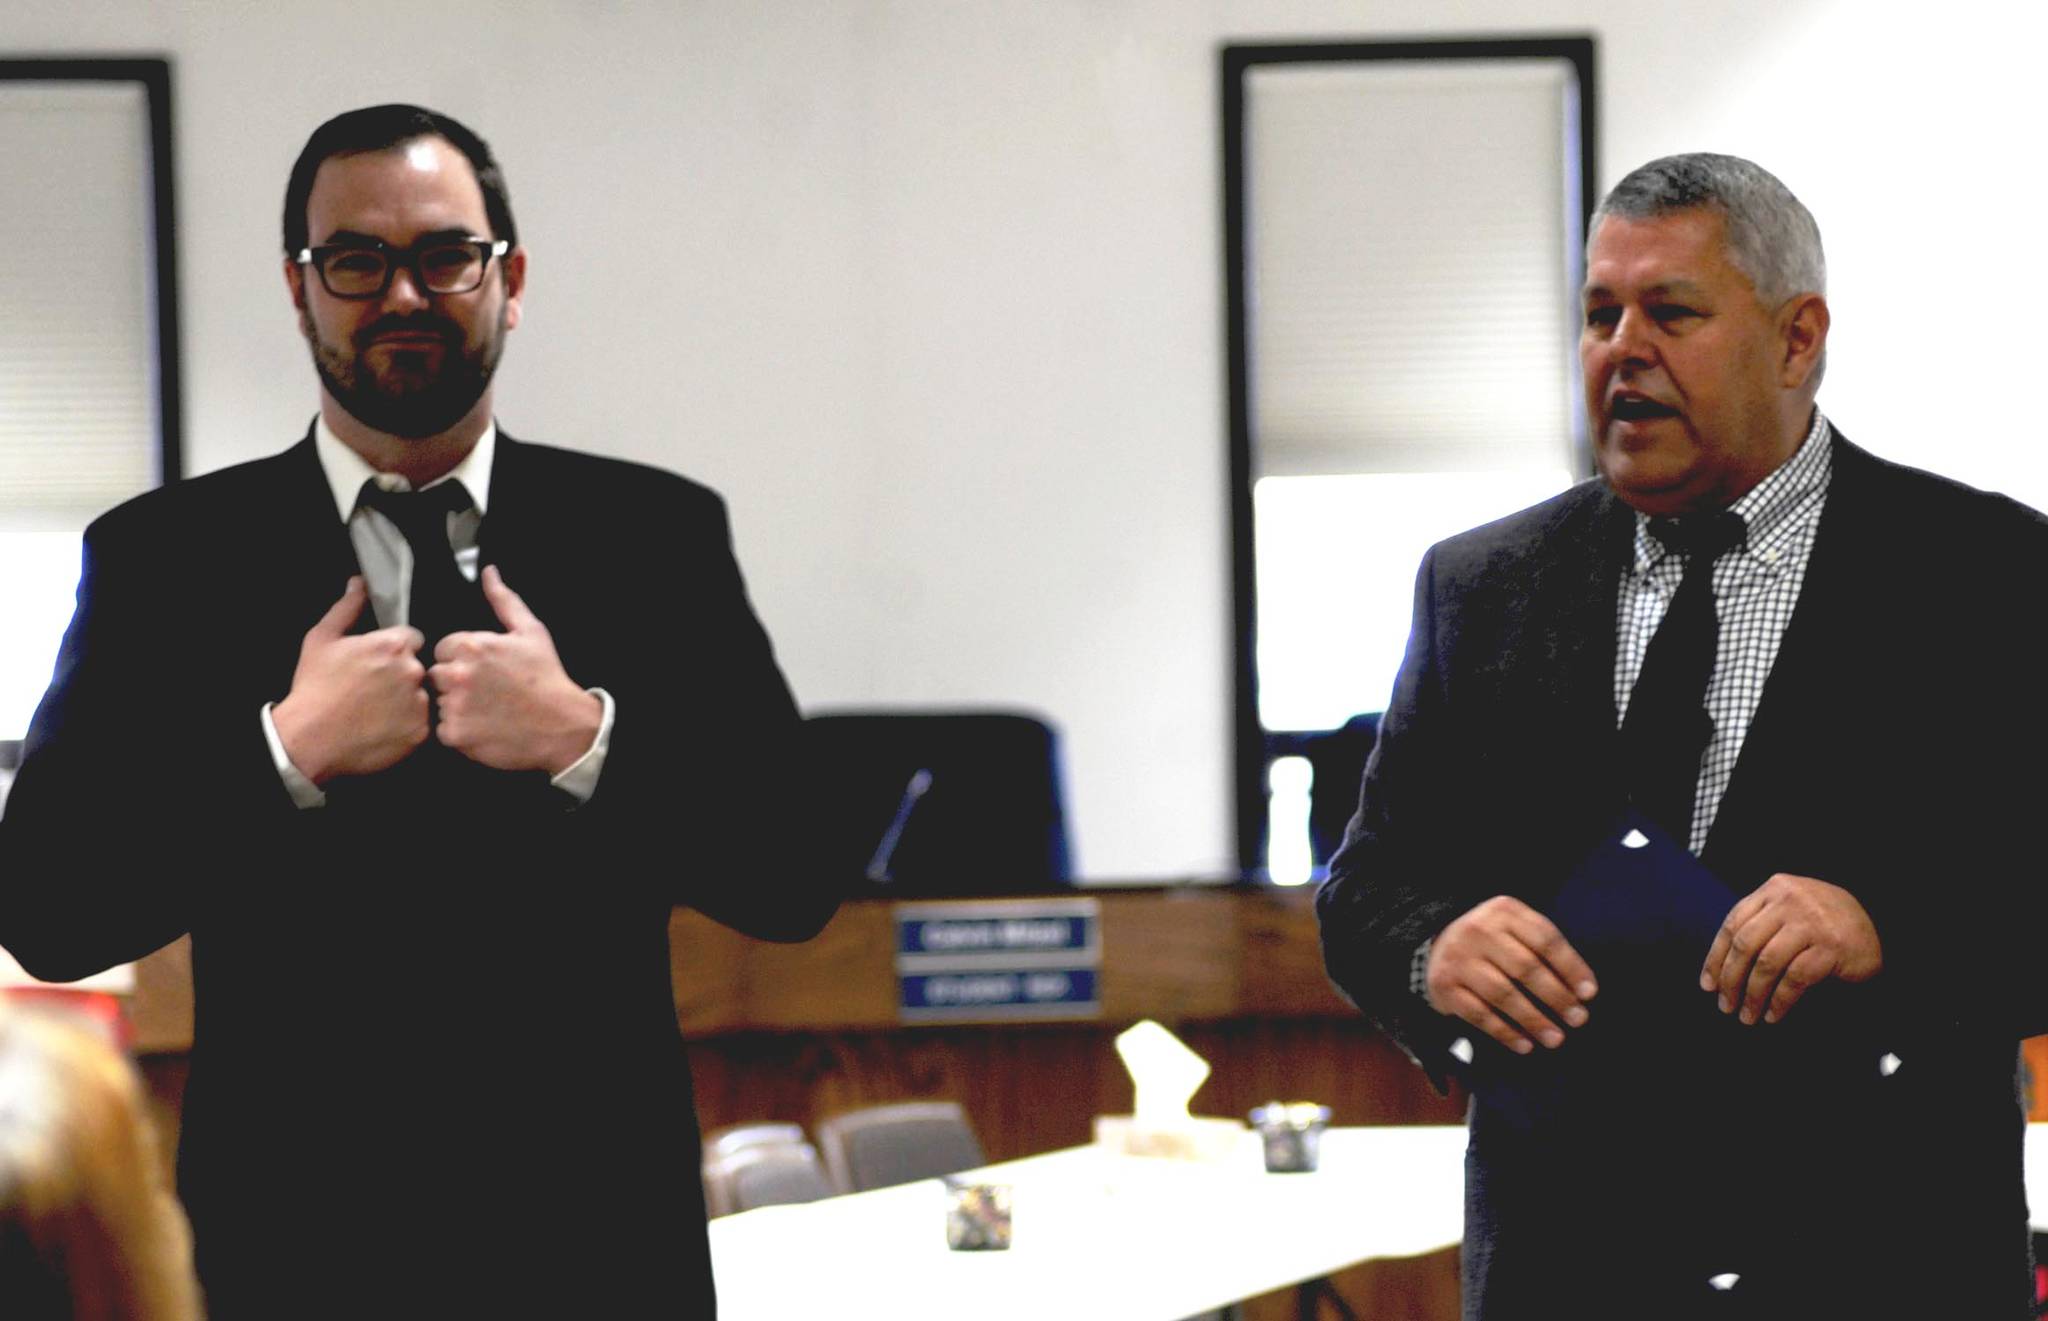 Borough Mayor Charlie Pierce and Chief of Staff John Quick speak to the attendees at Pierce’s swearing-in ceremony at the George A. Navarre Borough Administration Building on Monday, Nov. 6, 2017 in Soldotna, Alaska. Monday marked Pierce’s first official day on the job, though he and Quick spent part of last week in the borough building working on the transition of administrations with former mayor Mike Navarre. (Photo by Elizabeth Earl/Peninsula Clarion)